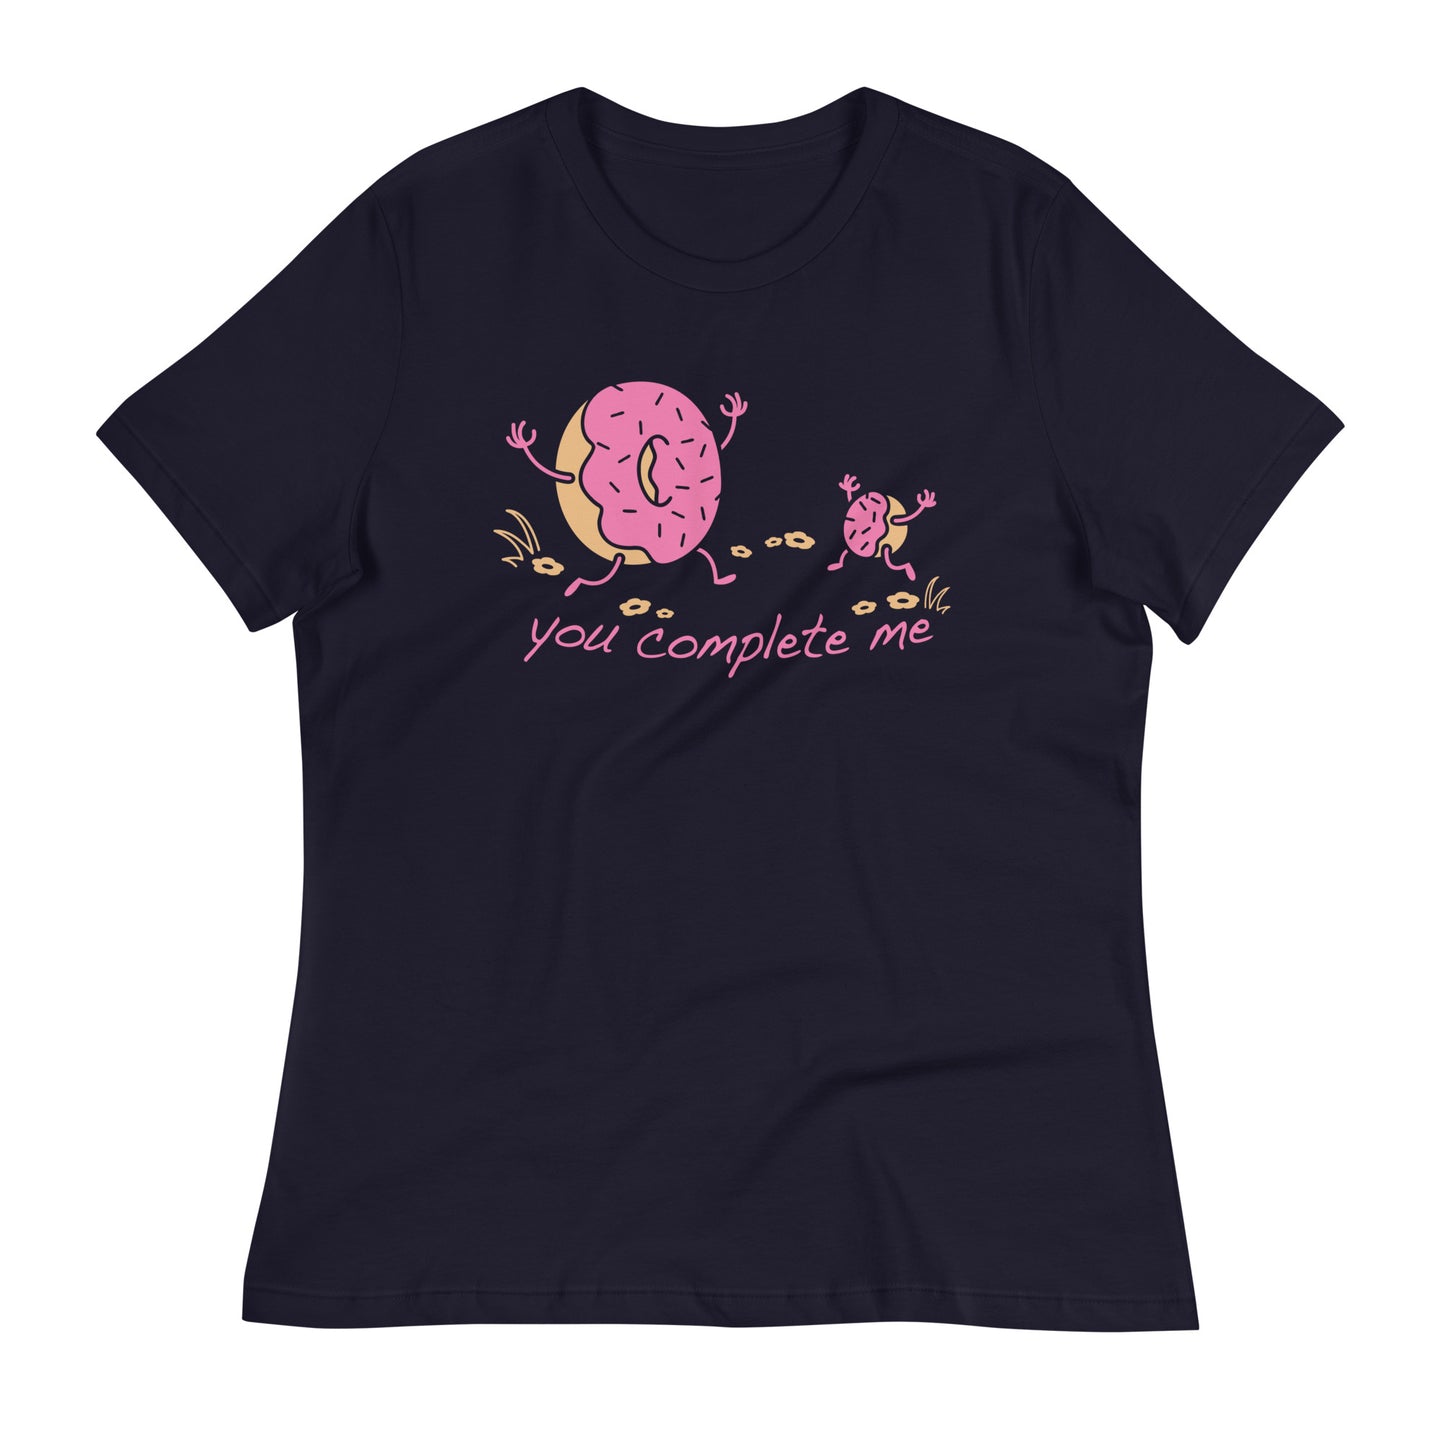 You Complete Me Women's Signature Tee